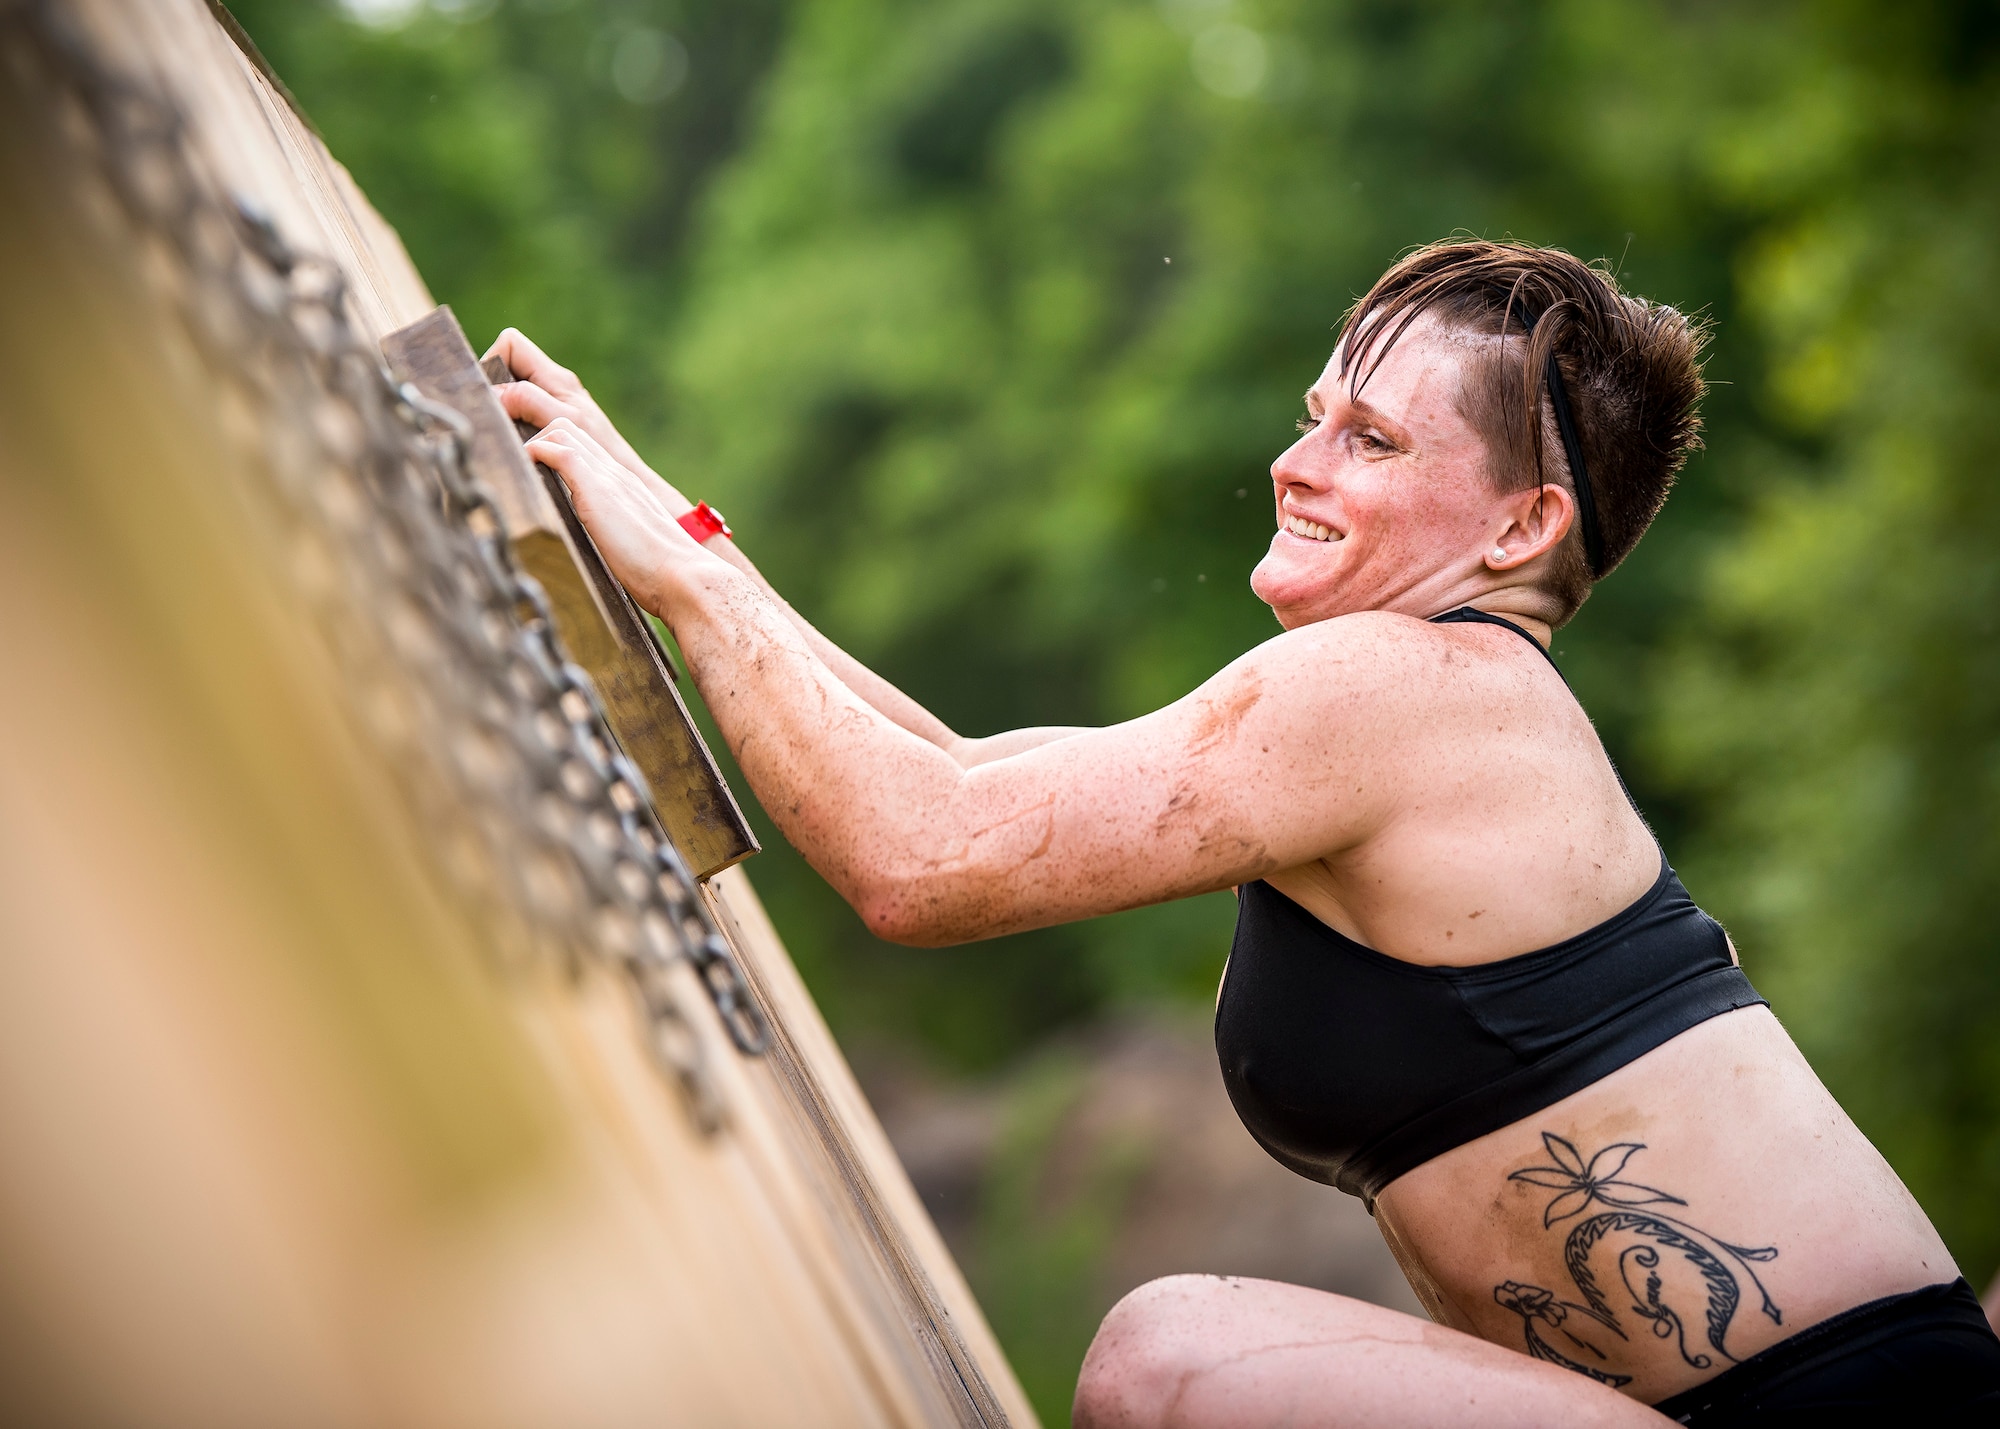 A Moody Mud Run participant attempts an obstacle, May 4, 2019, in Ray City, Ga. The sixth annual Mud Run had approximately 850 participants who had to overcome a series of obstacles on the 4 and 5-mile courses. The 32-obstacle course gave Airmen, families and the local community an opportunity to build camaraderie and teamwork skills. (U.S. Air Force photo by Airman 1st Class Eugene Oliver)